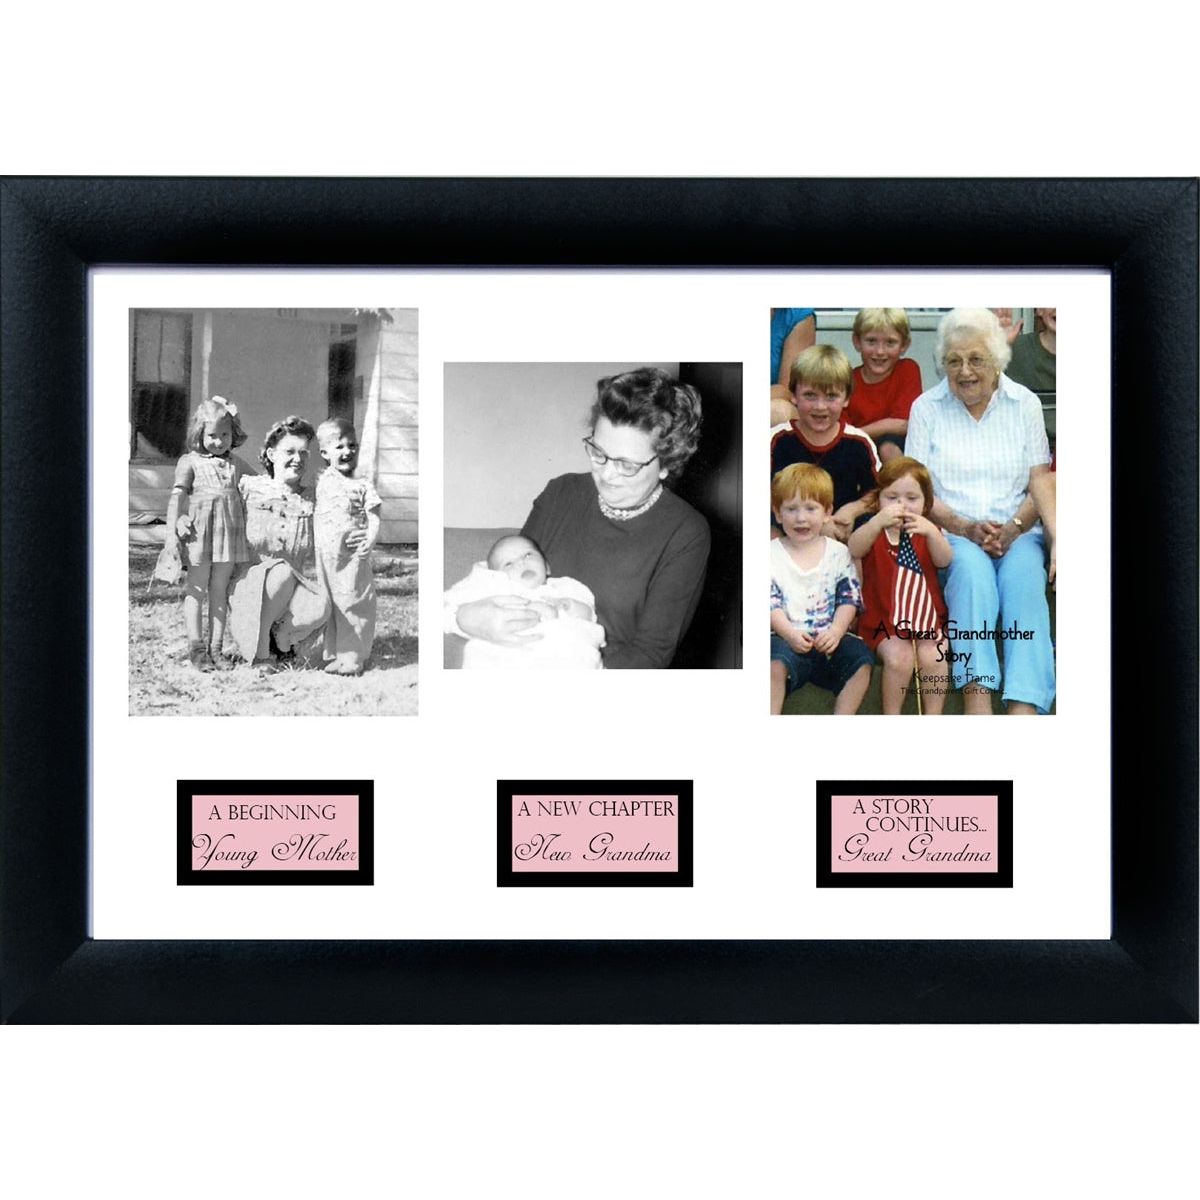 8x12 black frame for wall or table display with 3 spaces and captions for photos for a Great-Grandma&#39;s life story.